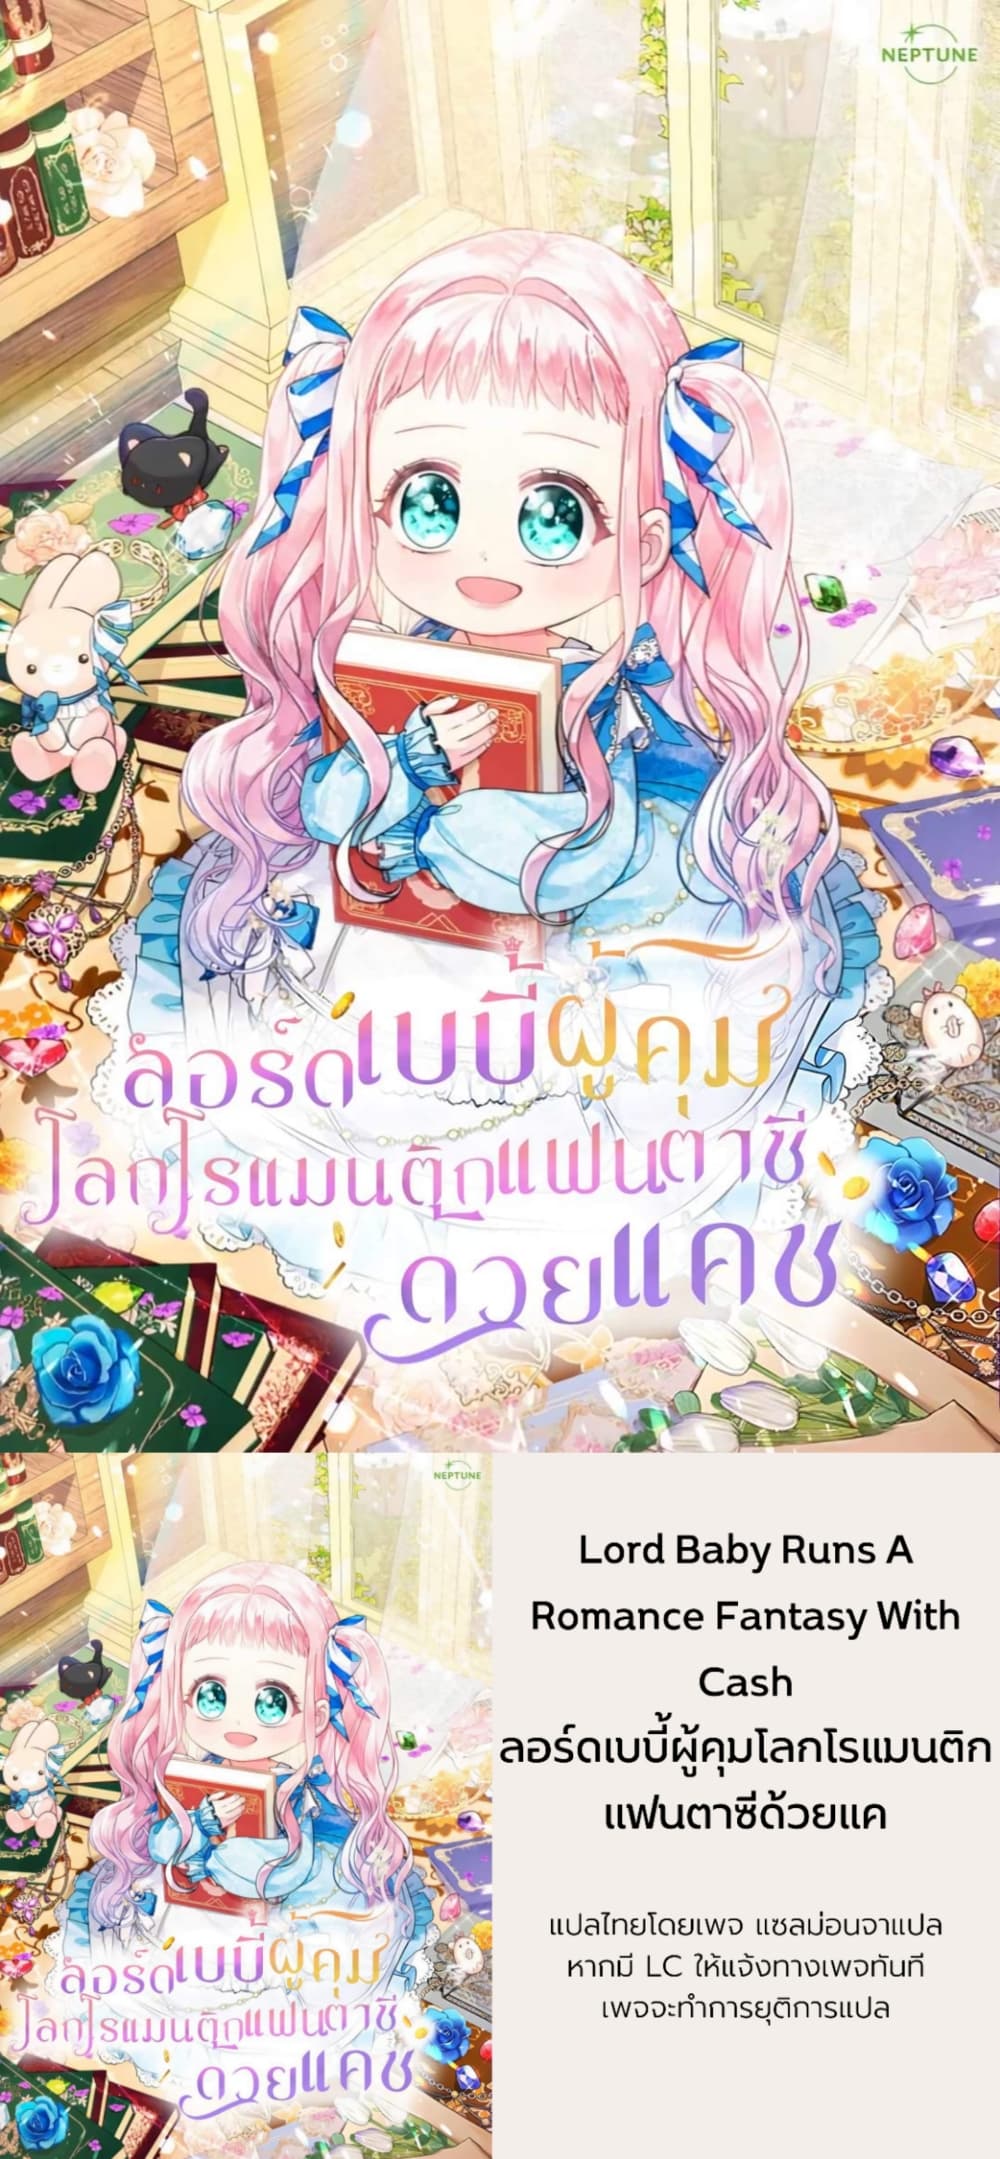 Lord Baby Runs a Romance Fantasy With Cash 2-2